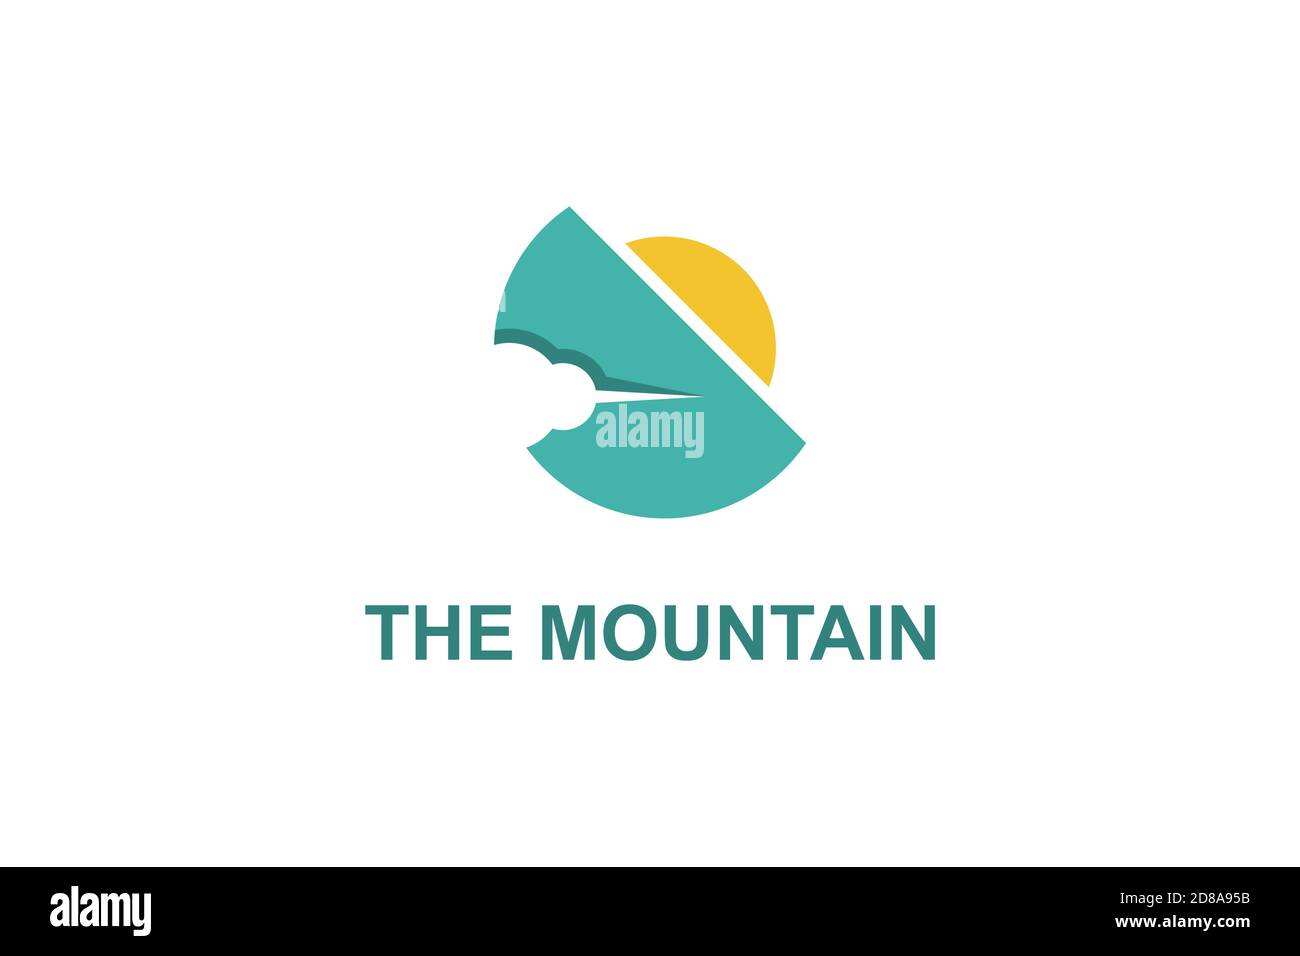 Vector illustration of mountain with sun and cloud on negative space design concept, mountain landscape logo. Stock Vector